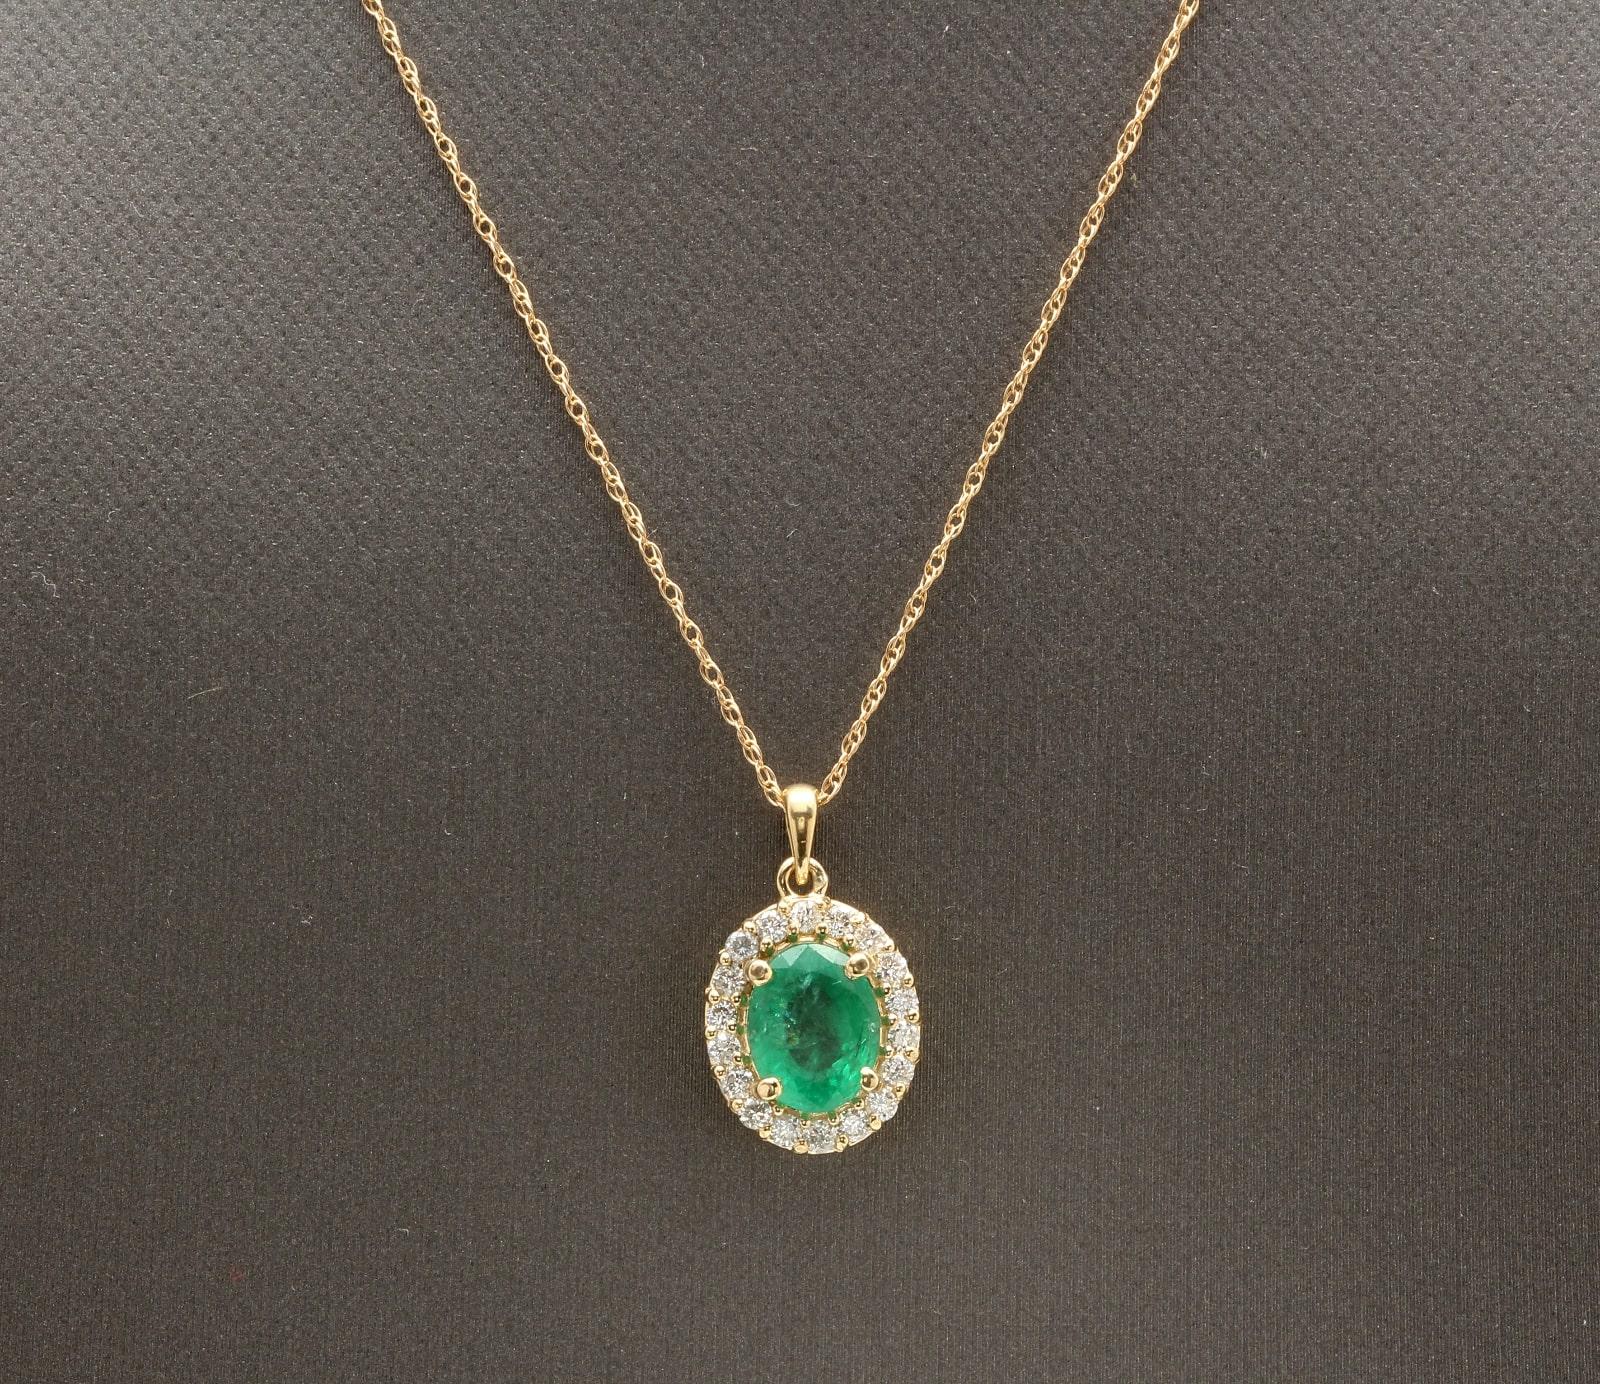 2.45Ct Natural Emerald and Diamond 14K Solid Yellow Gold Necklace

Amazing looking piece! 

Stamped: 14K

Suggested Replacement Value: $4,500.00 

Natural Emerald Weights: Approx. 2.00 Carats

Emerald Measures: Approx. 9.00 x 7.00mm

Total Natural